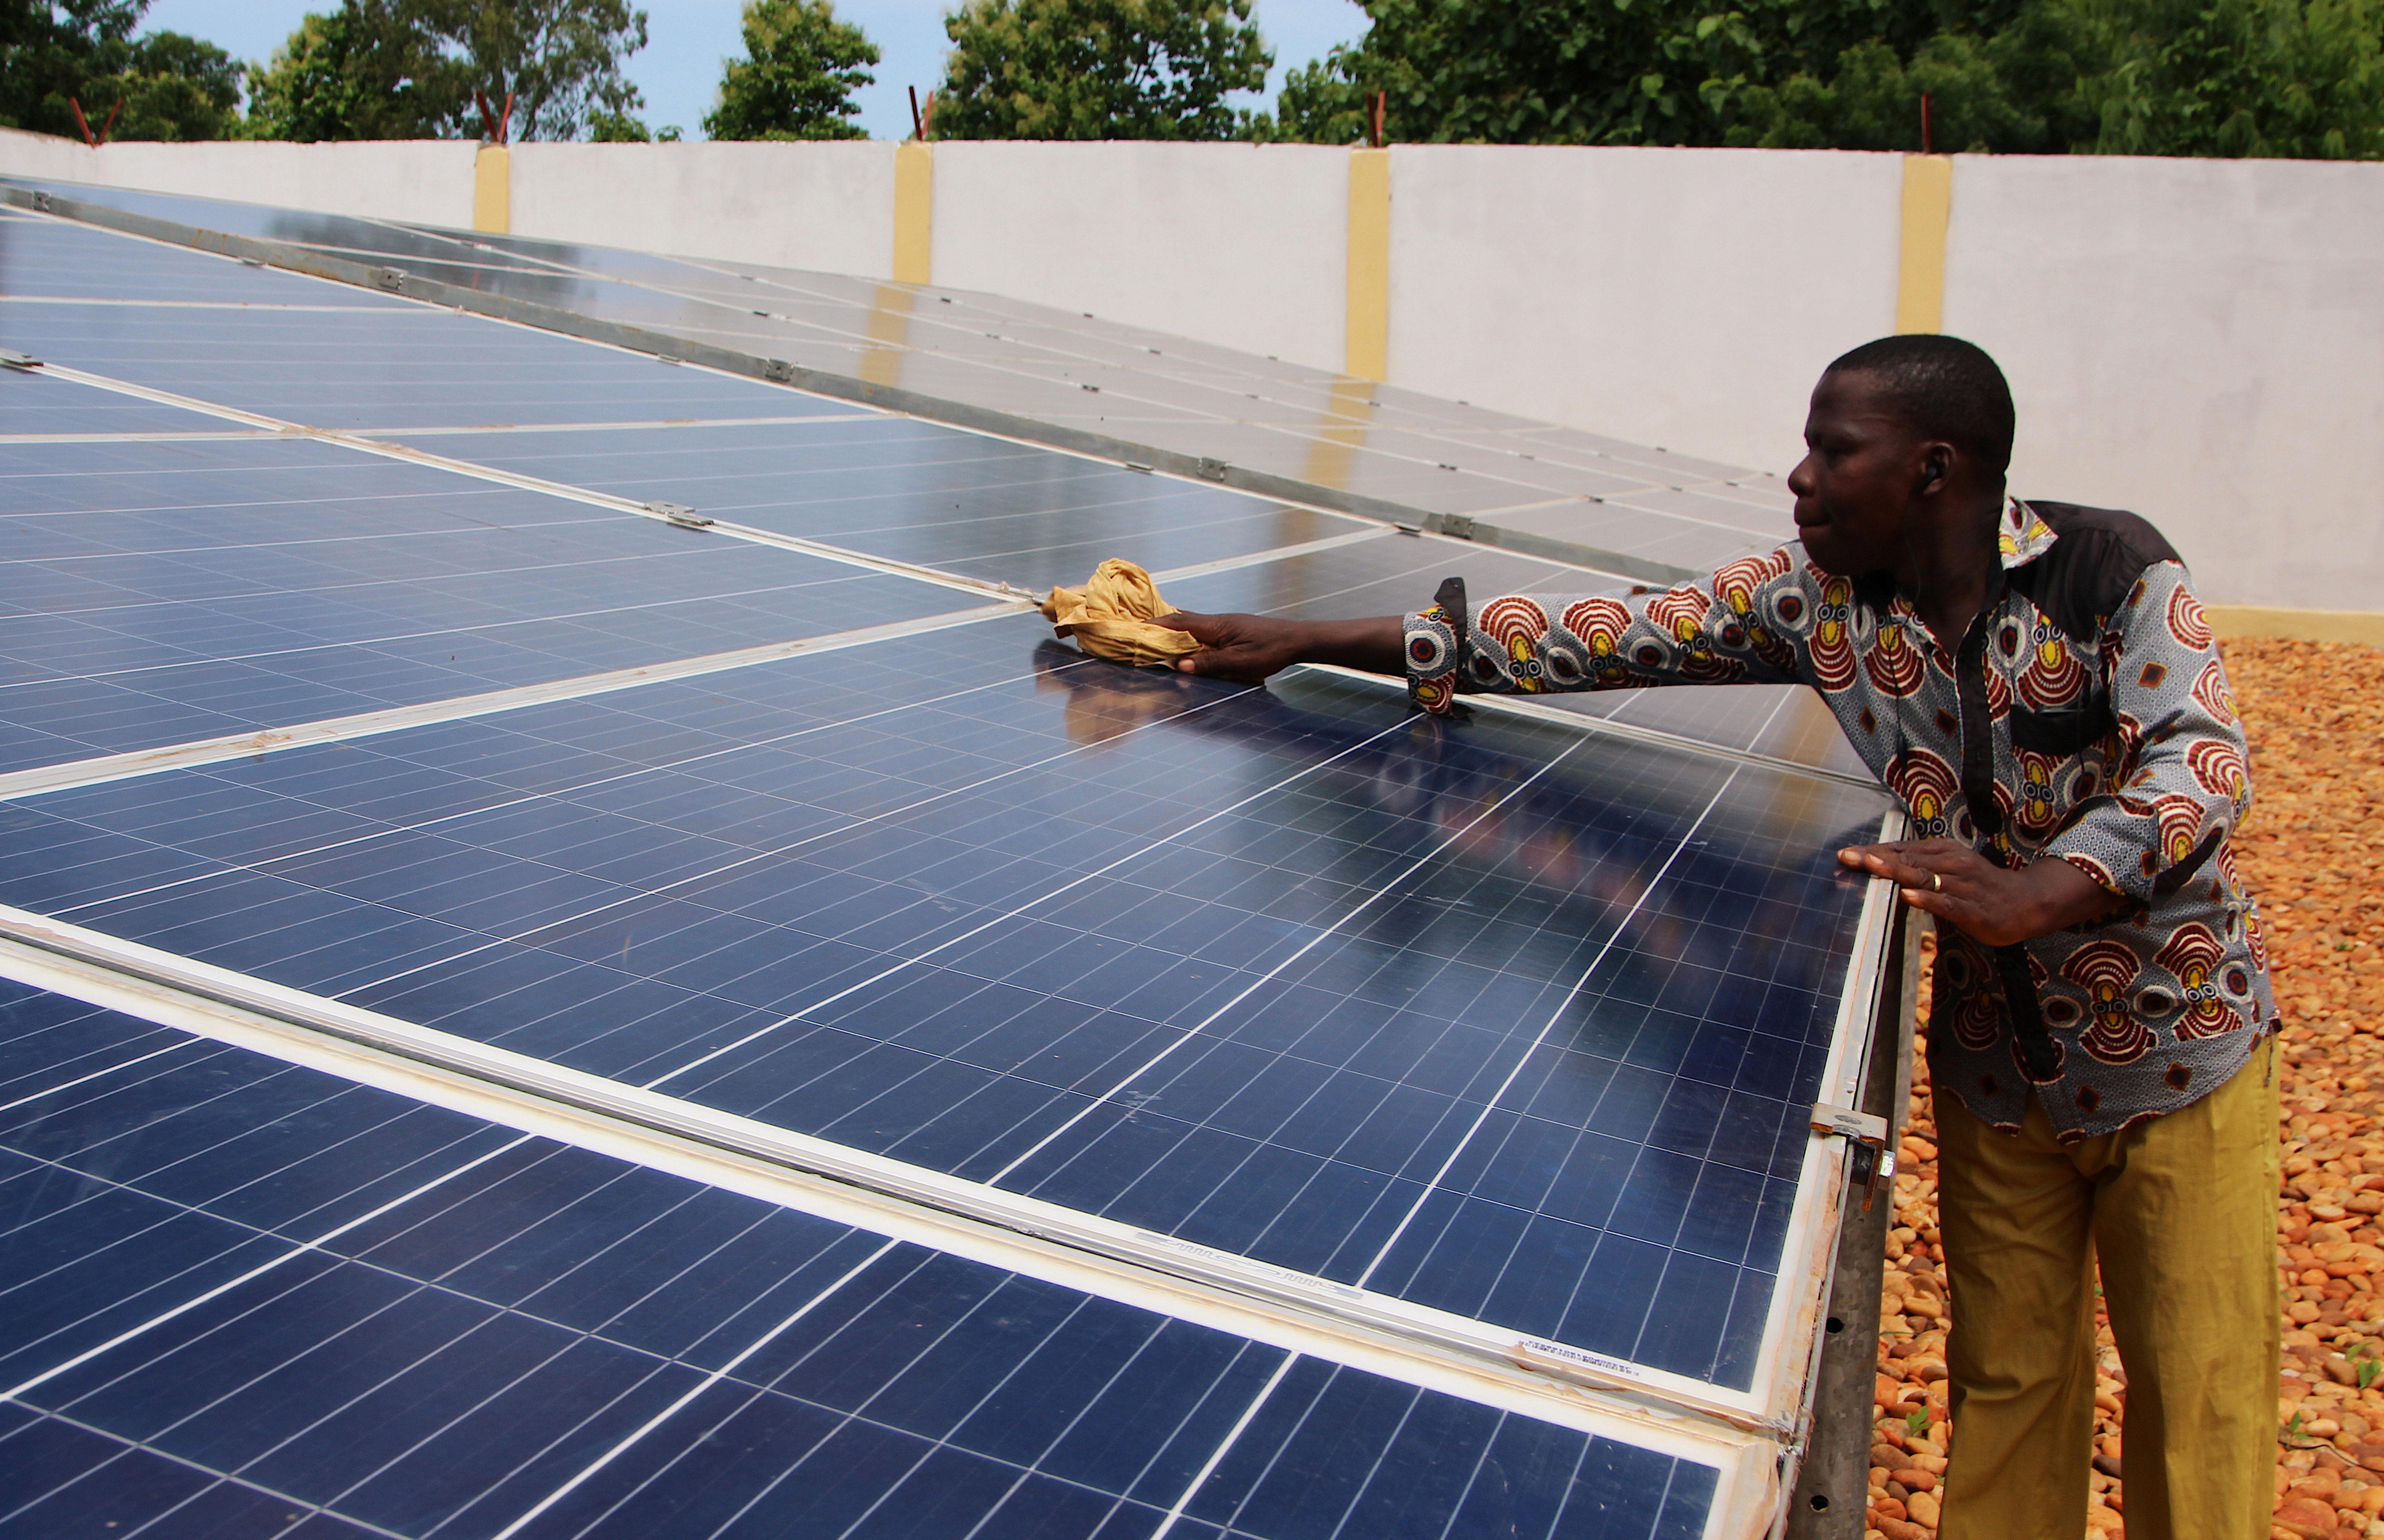 A technician cleans solar panels in Togo. Many renewable projects in developing countries have failed because funding failed to plan for operation and maintenance needs. REUTERS/Noel Kokou Tadegnon